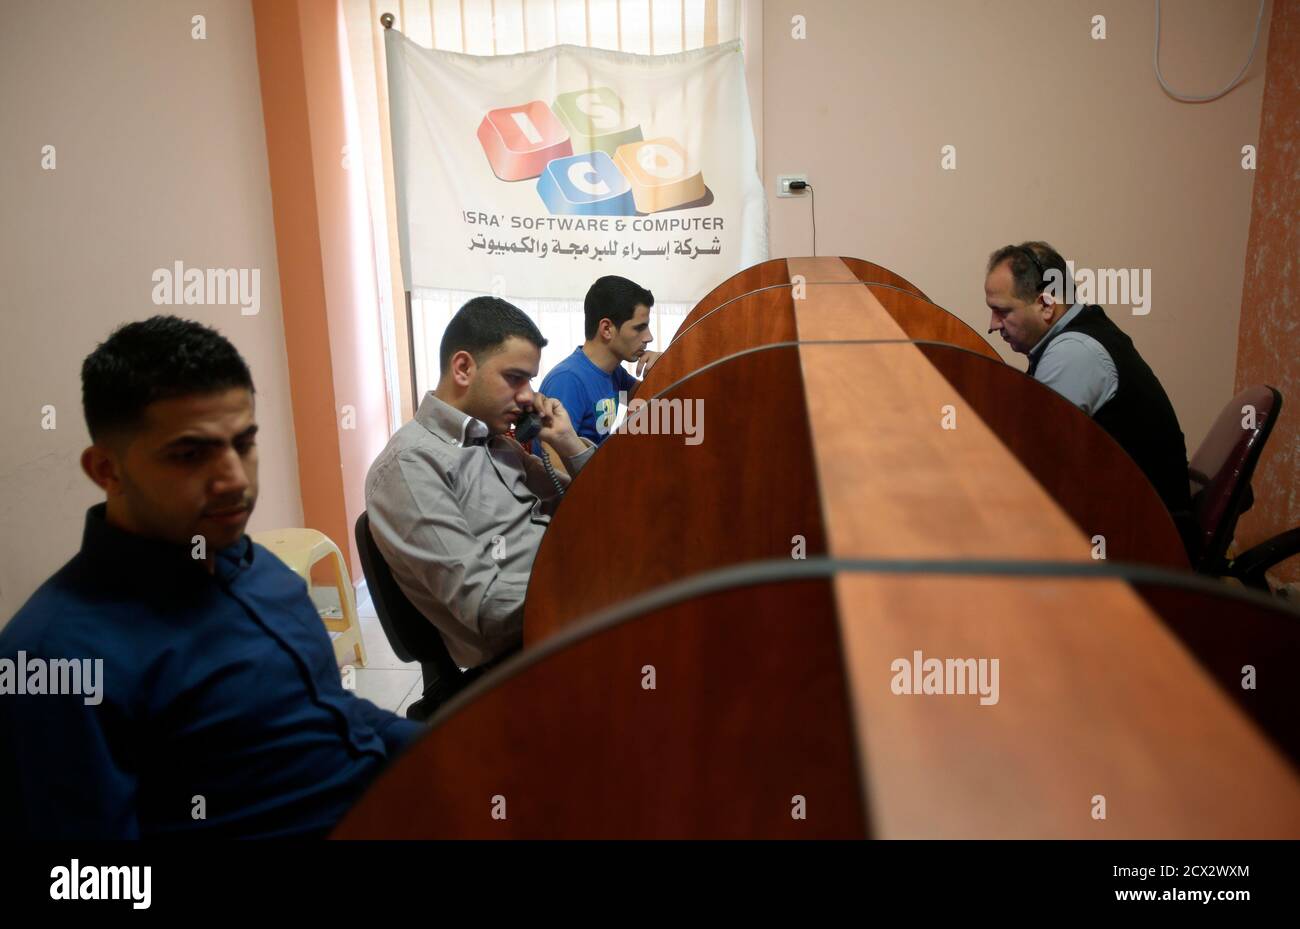 Employees work at Isra Software & Computer Co., an e-commerce firm in the  West Bank city of Nablus April 8, 2013. Fledgling Palestinian high-tech  firms hope they can now help revitalise the